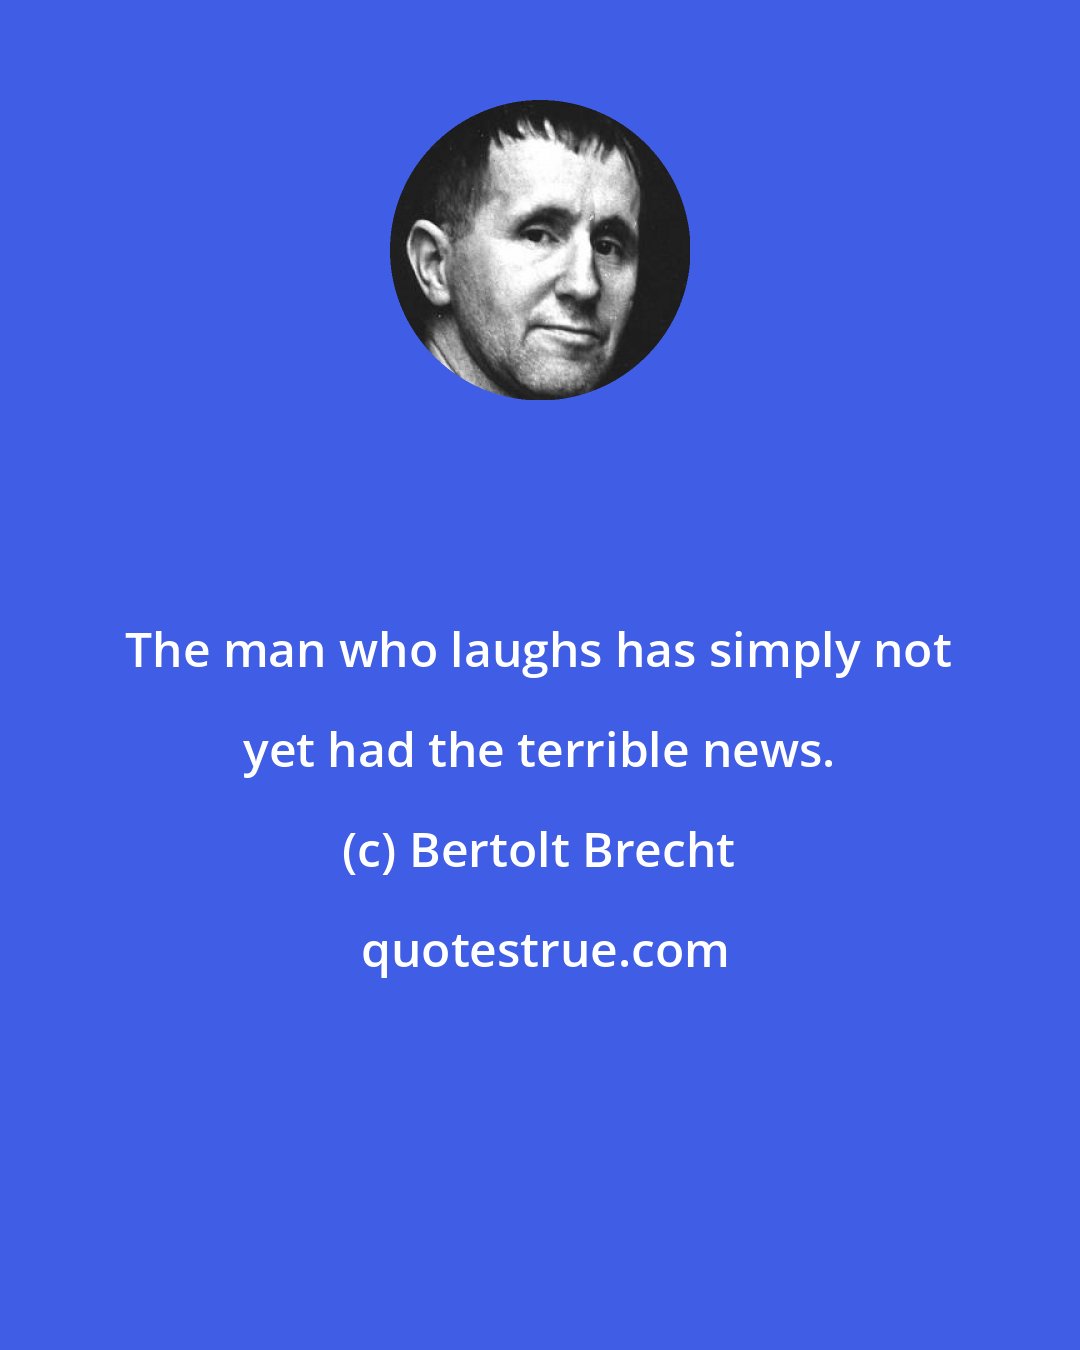 Bertolt Brecht: The man who laughs has simply not yet had the terrible news.